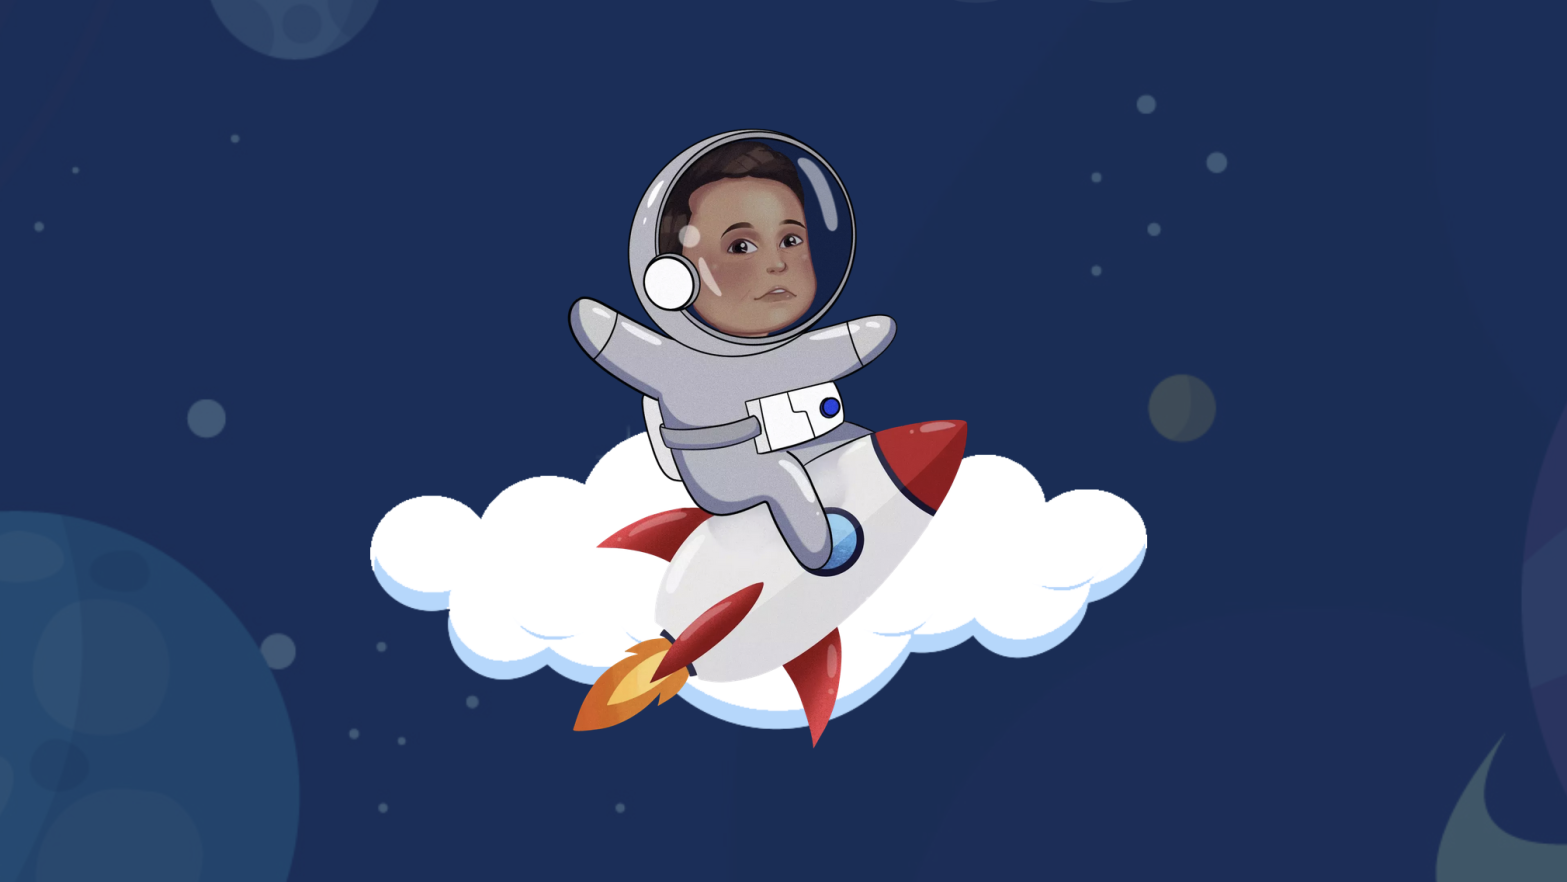 The non-deleted website of Baby Musk Coin, a scam that made off with $US2 ($3) million by using a cartoon likeness of Elon Musk as a baby. (Screenshot: Wayback Machine)